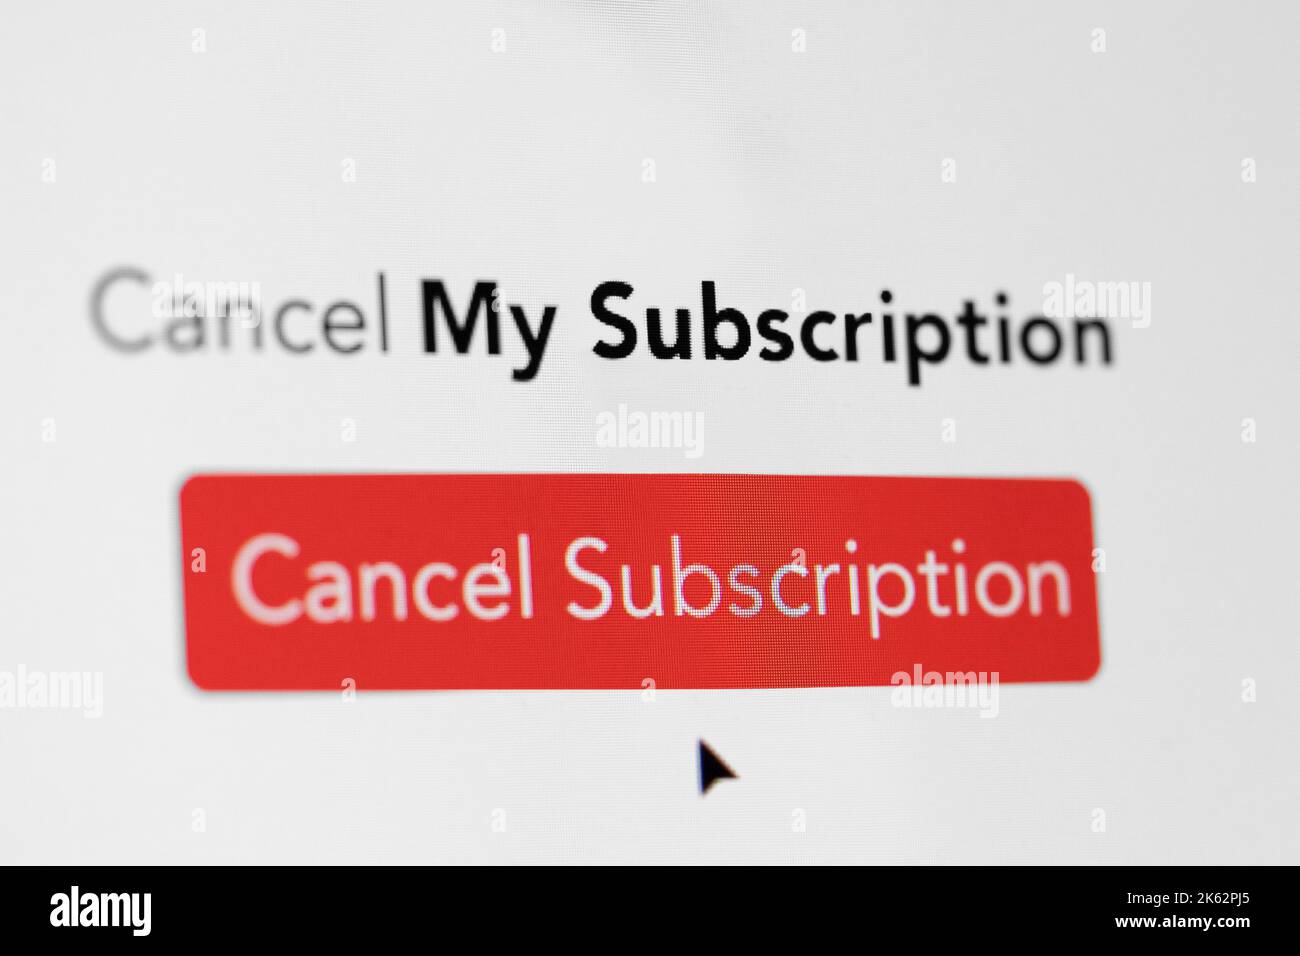 Close Up Of Computer Screen With Cancel My Subscription Message To Save Money In Cost Of Living Crisis Stock Photo